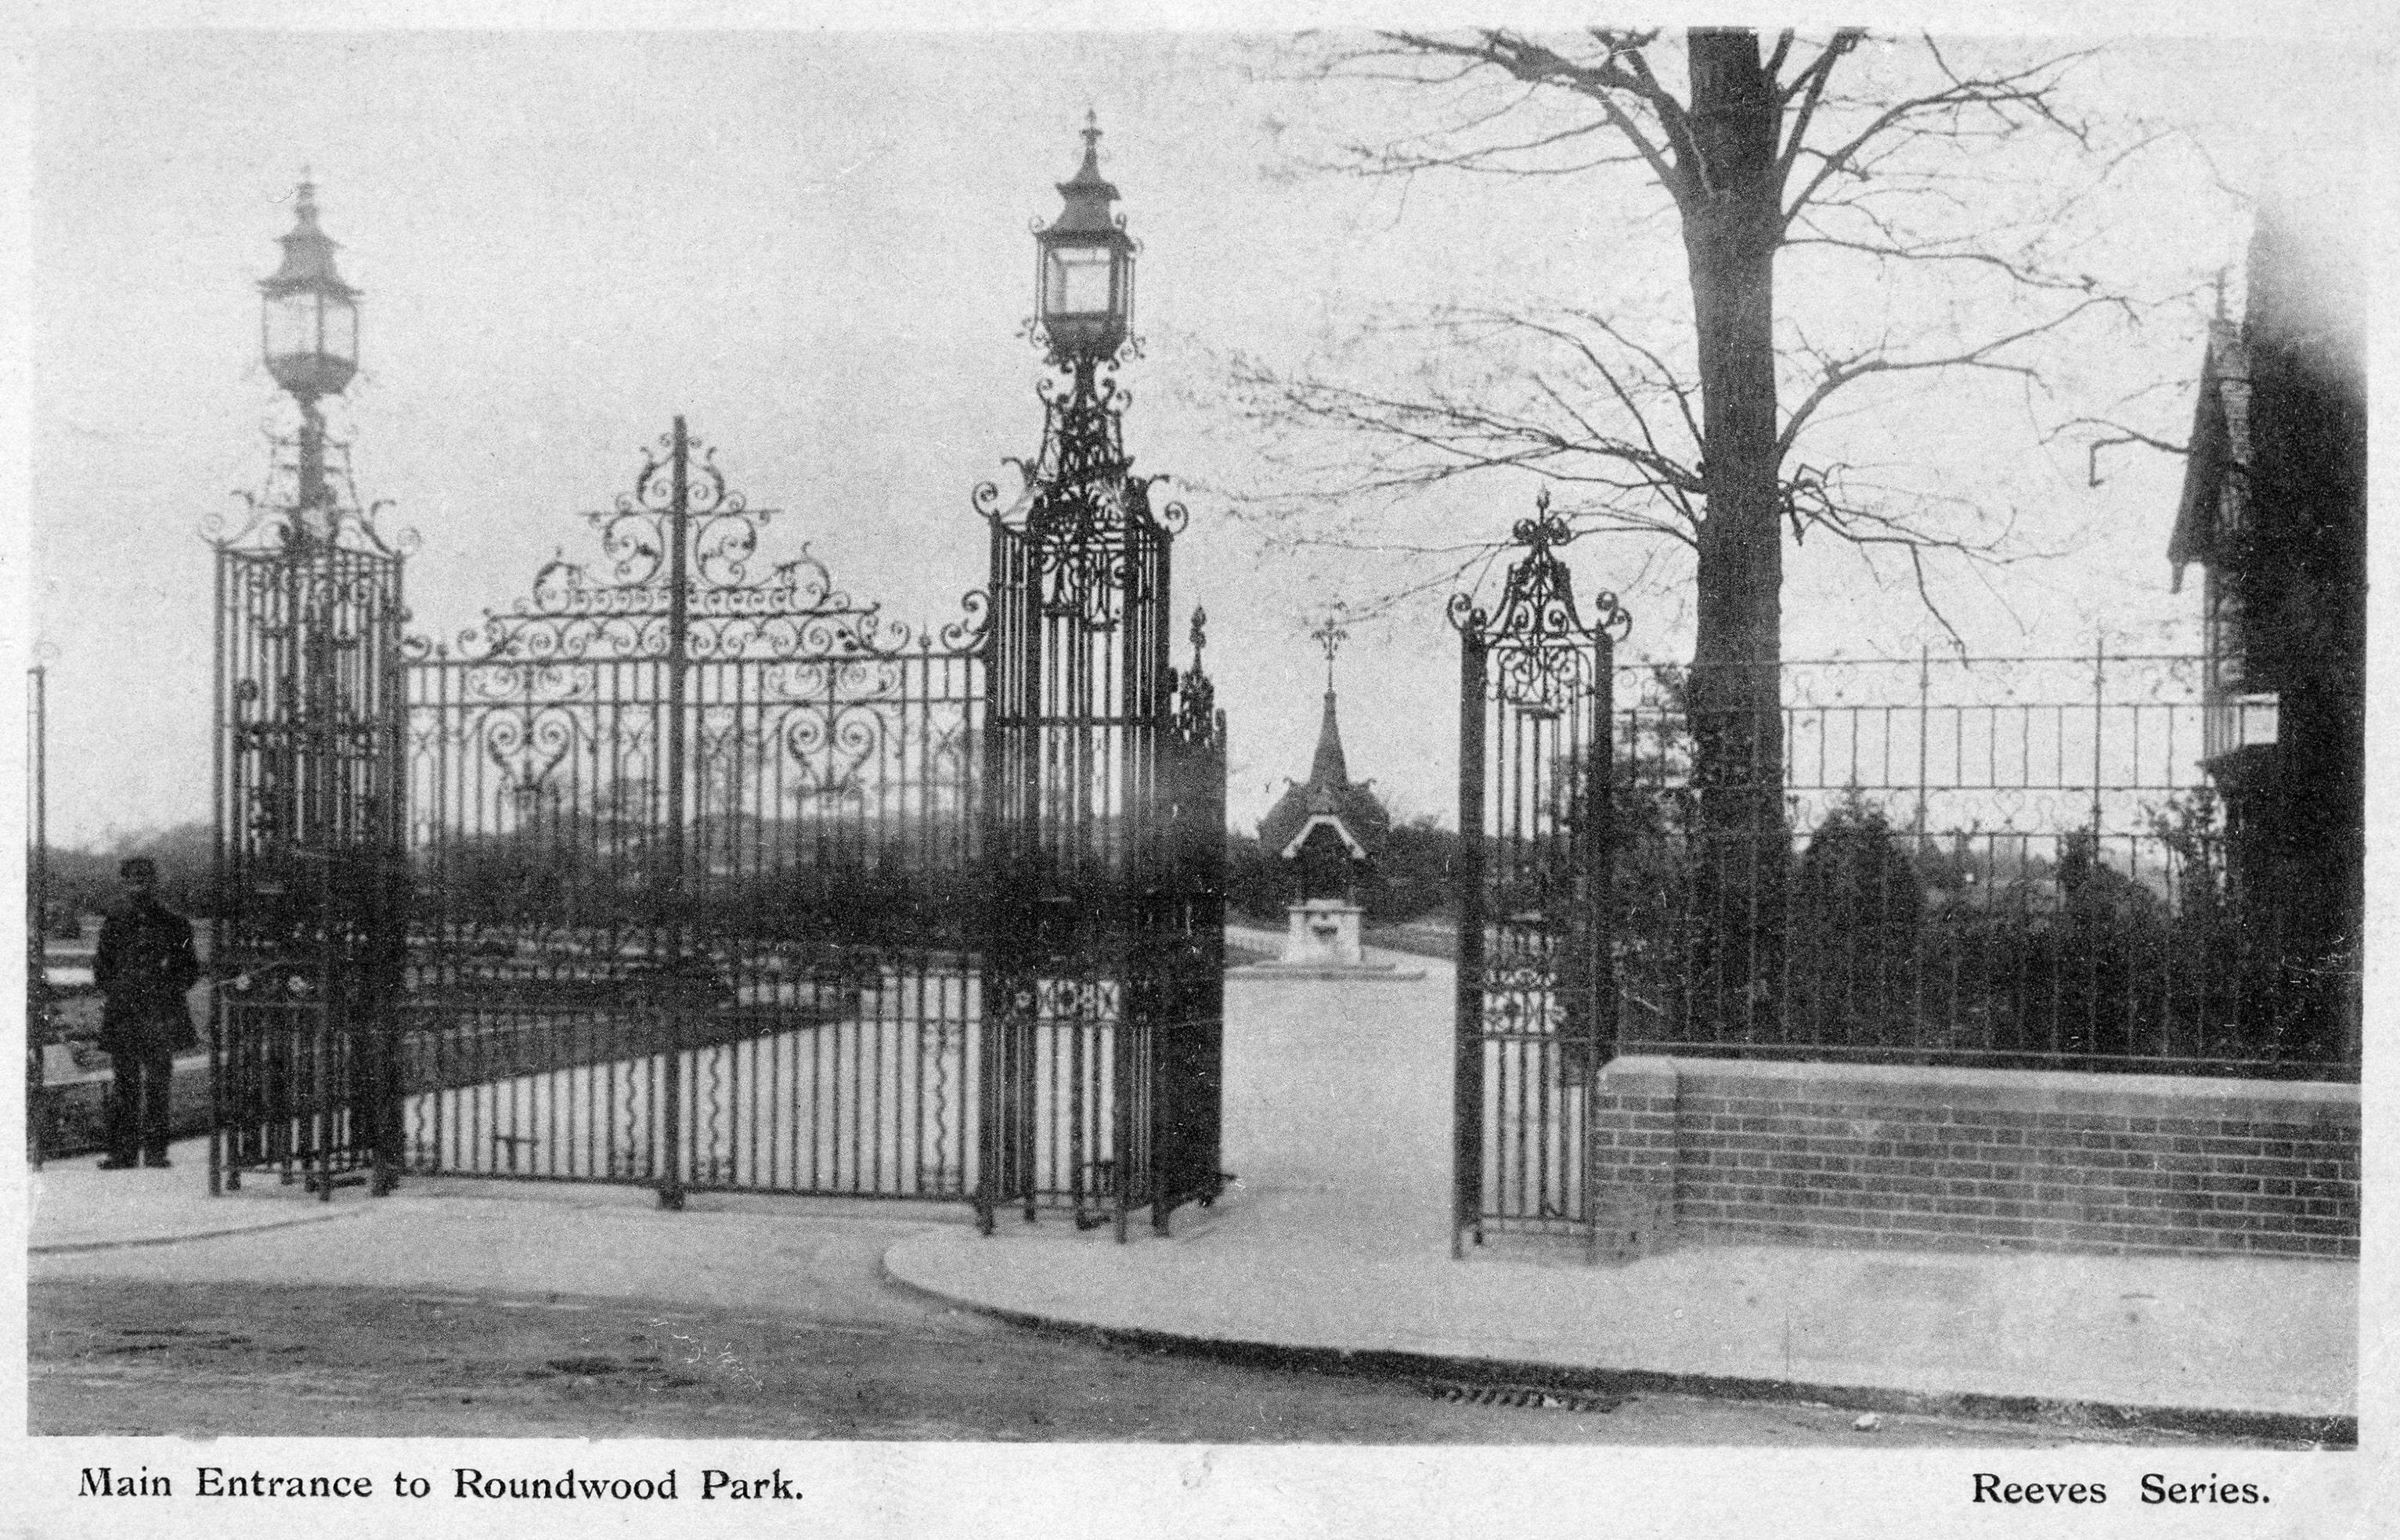 Postcard with black and white image showing gates at the entrance to a park. Underneath it is written, ‘Main Entrance to Roundwood Park’.